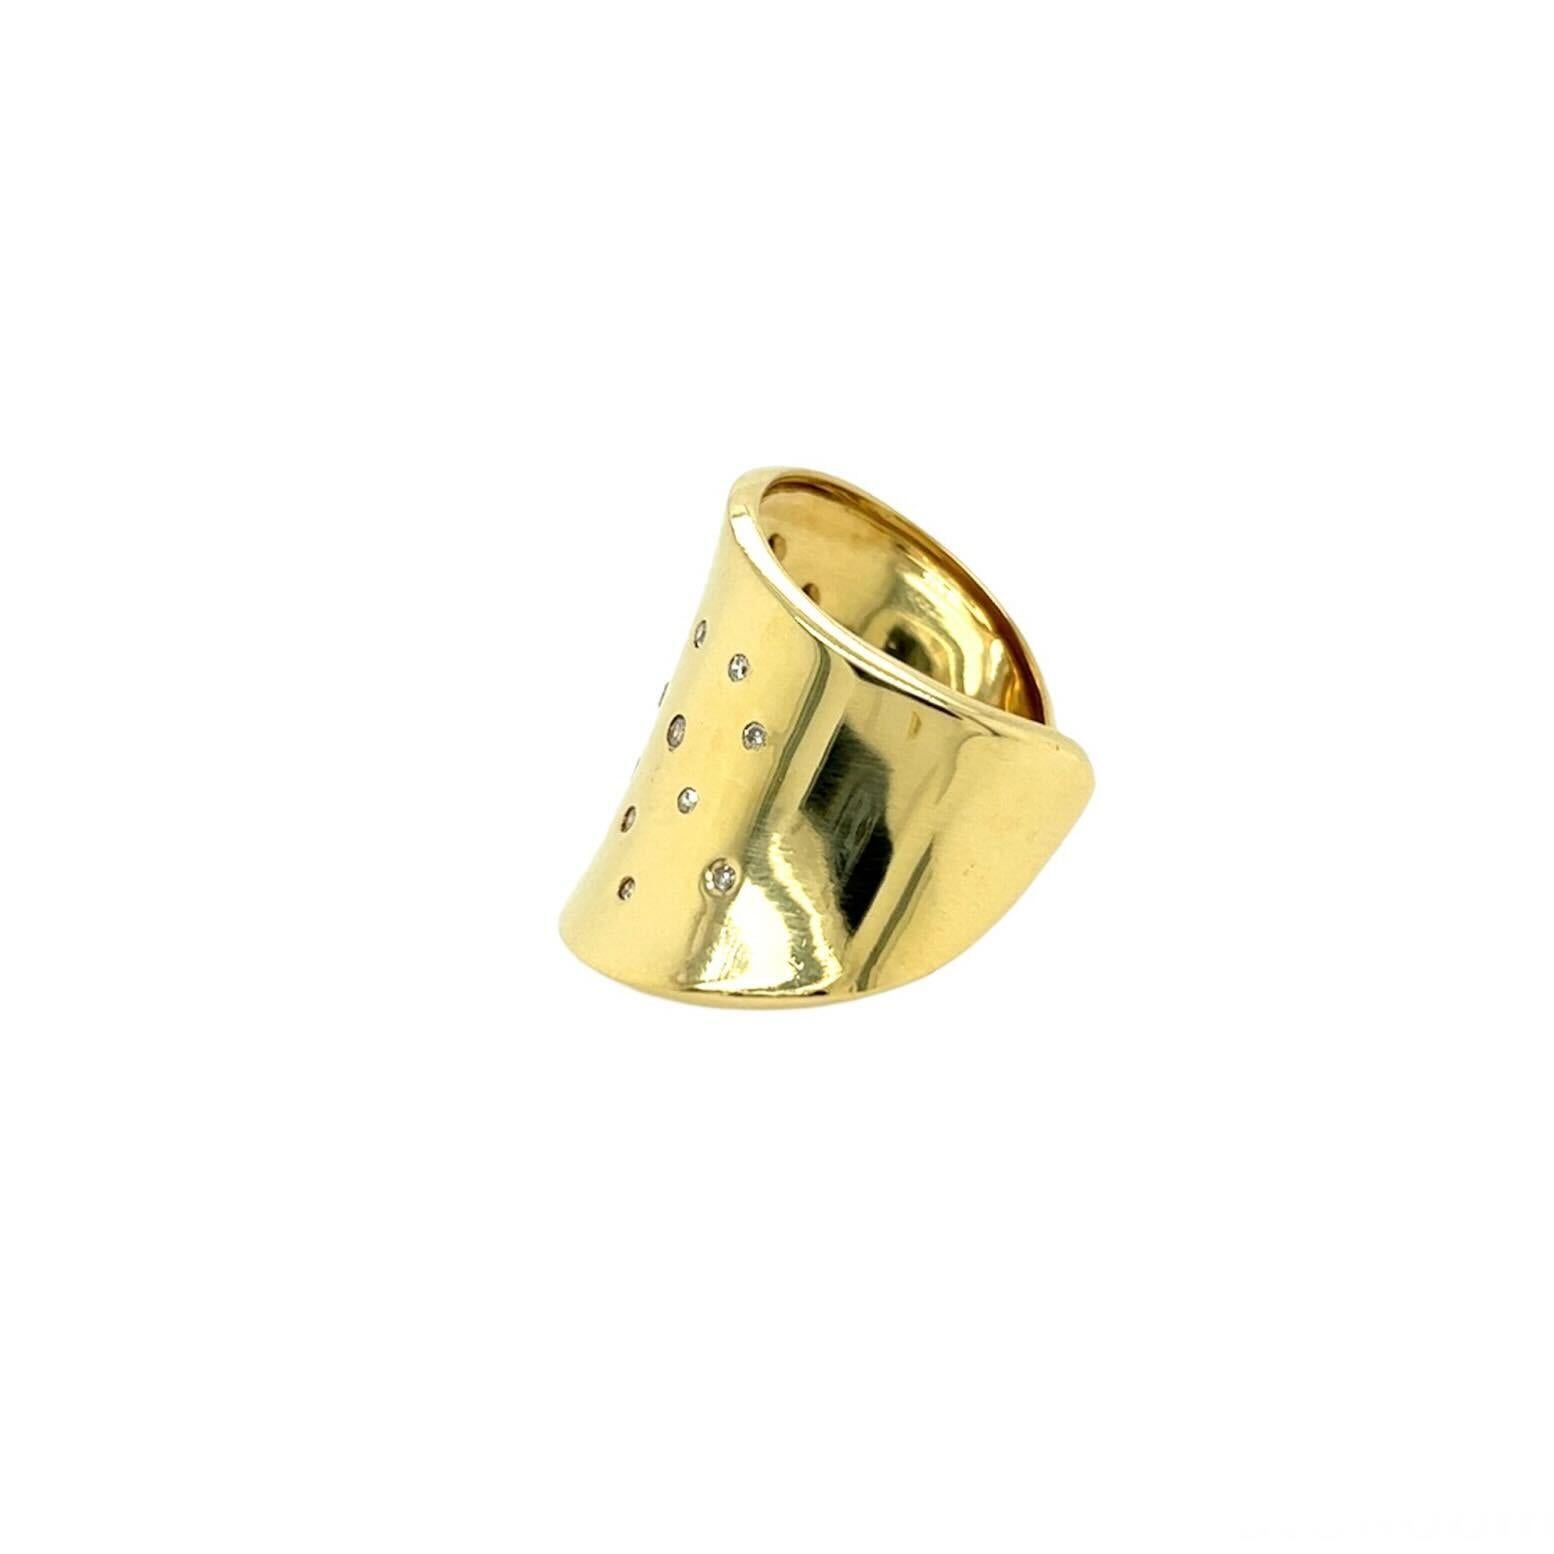 An 18 karat yellow gold and diamond ring, Robert Lee Morris.  Designed as a long sculptural form flaring at each end and open at the back scattered with twenty one brilliant cut diamonds.  Total diamond weight approximately 0.47 carat.  Size